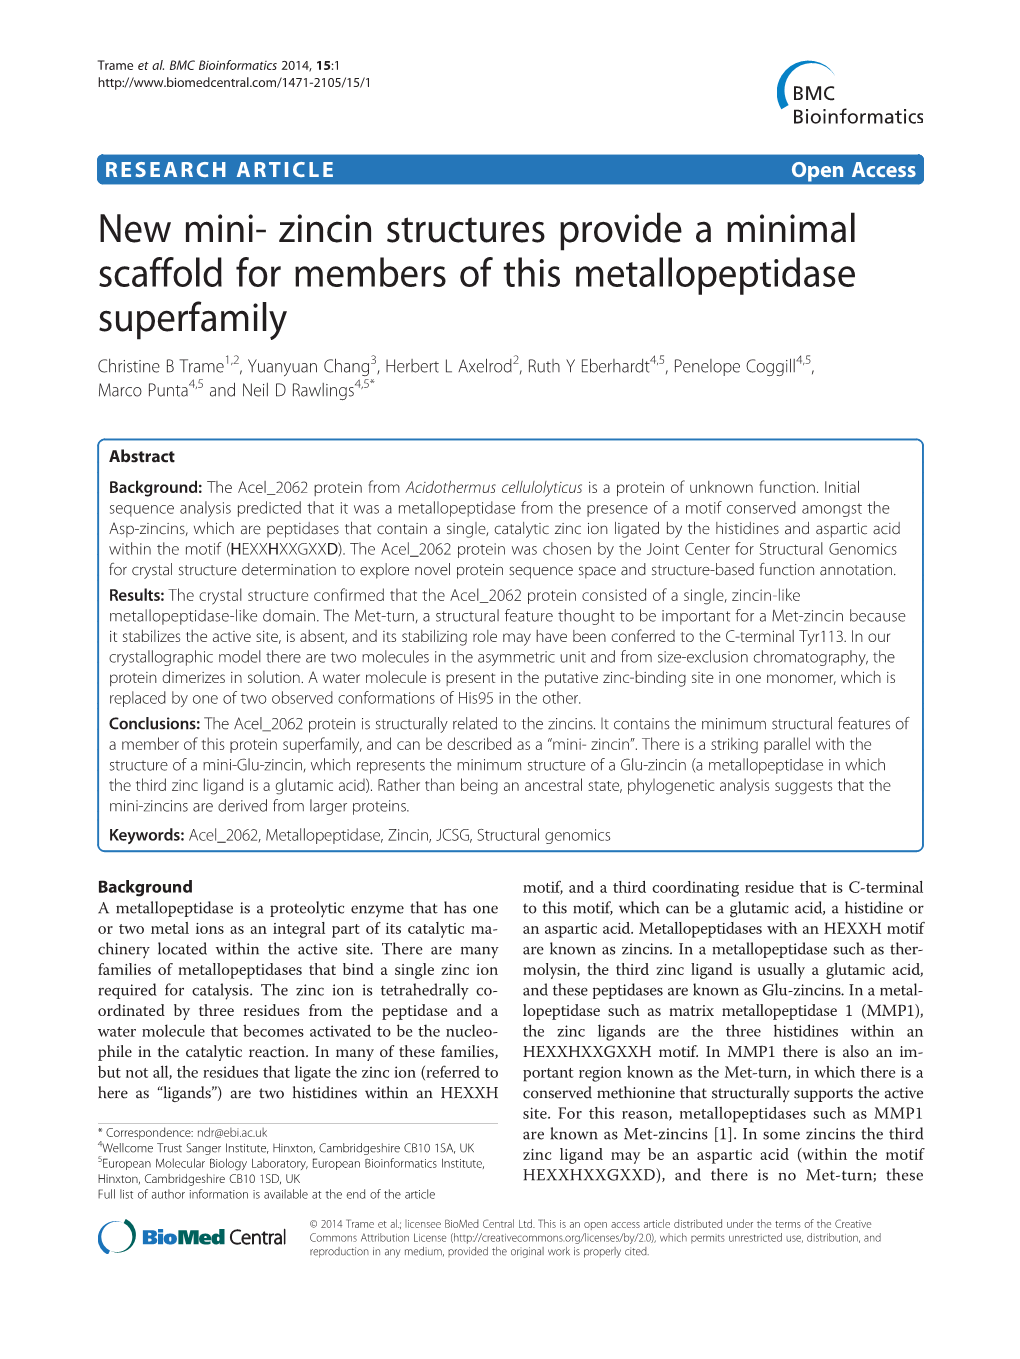 New Mini- Zincin Structures Provide a Minimal Scaffold for Members of This